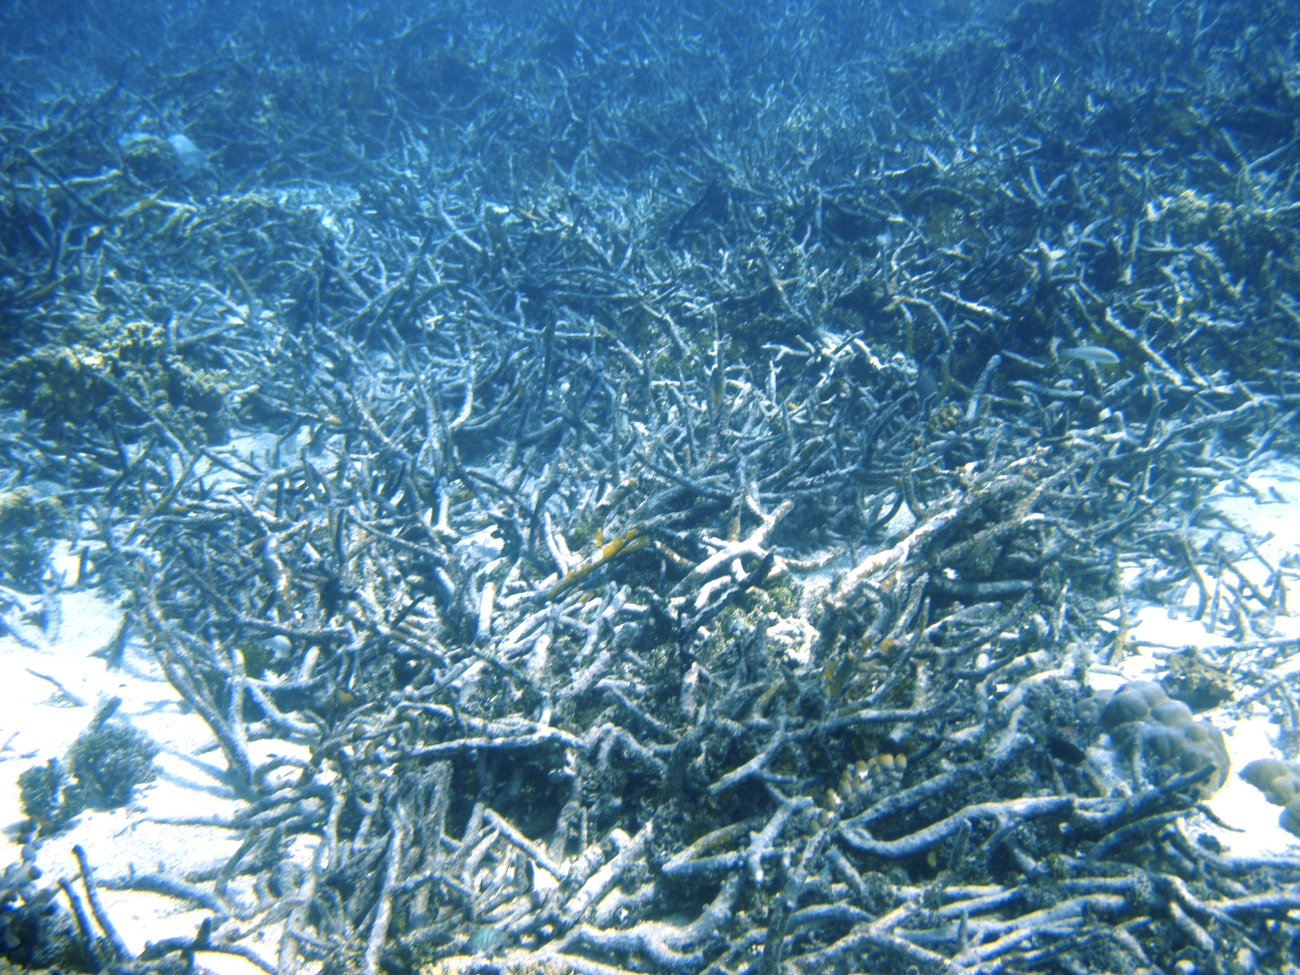 Dead staghorn coral